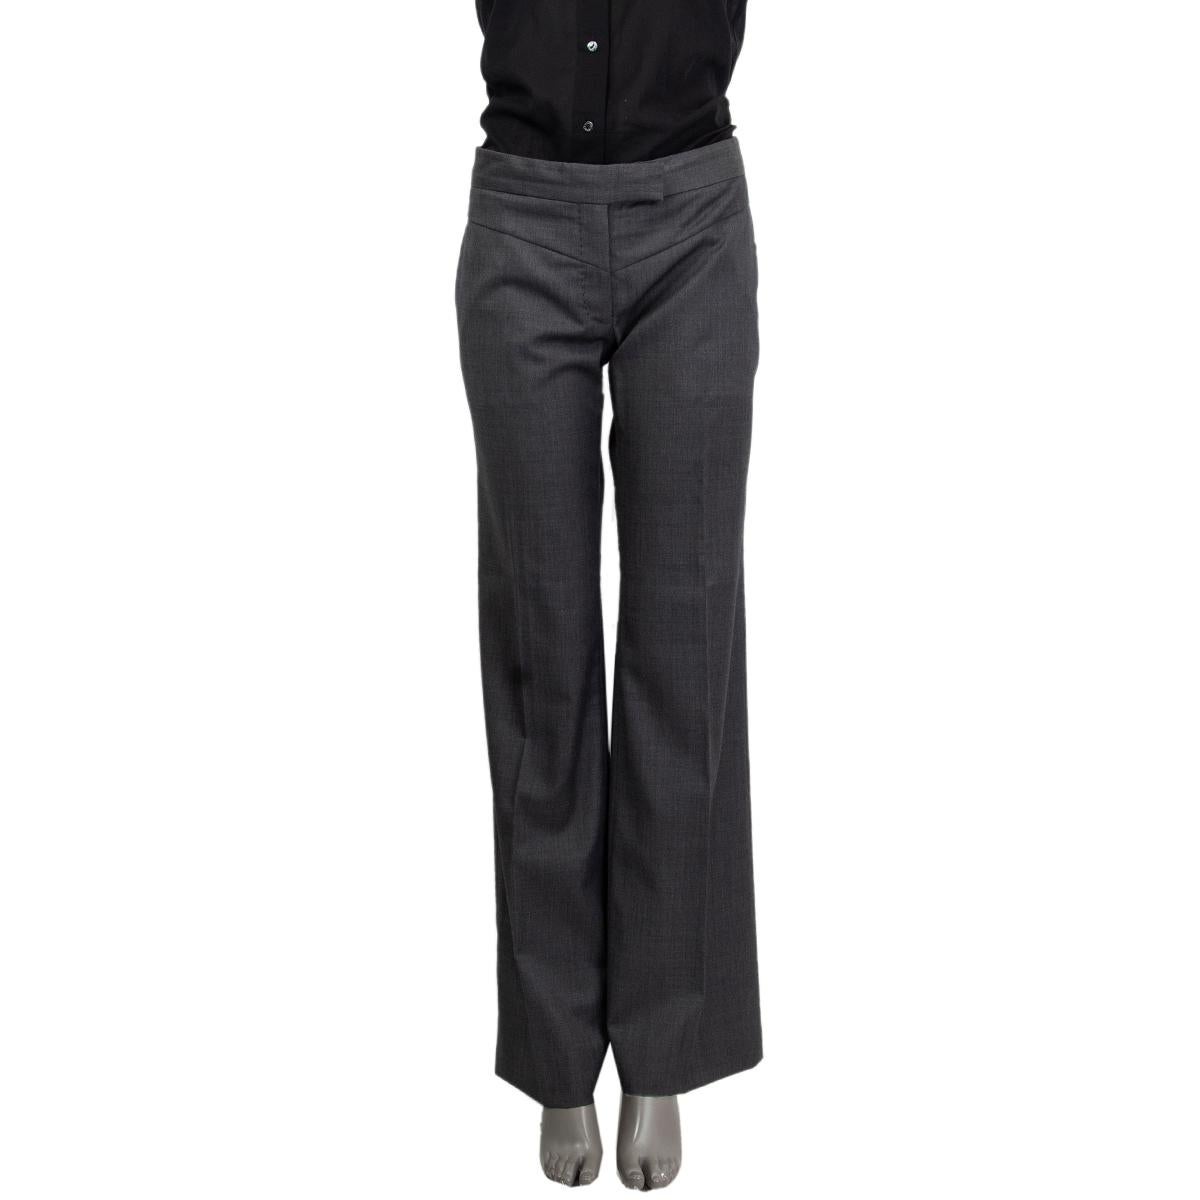 100% authentic Stella McCartney suit pants in grey wool (100%) with pockets. Close on the front with with a zipper and hook fastener. Have been worn and are in excellent condition. 

See separate listing for matching blazer.

Measurements
Tag